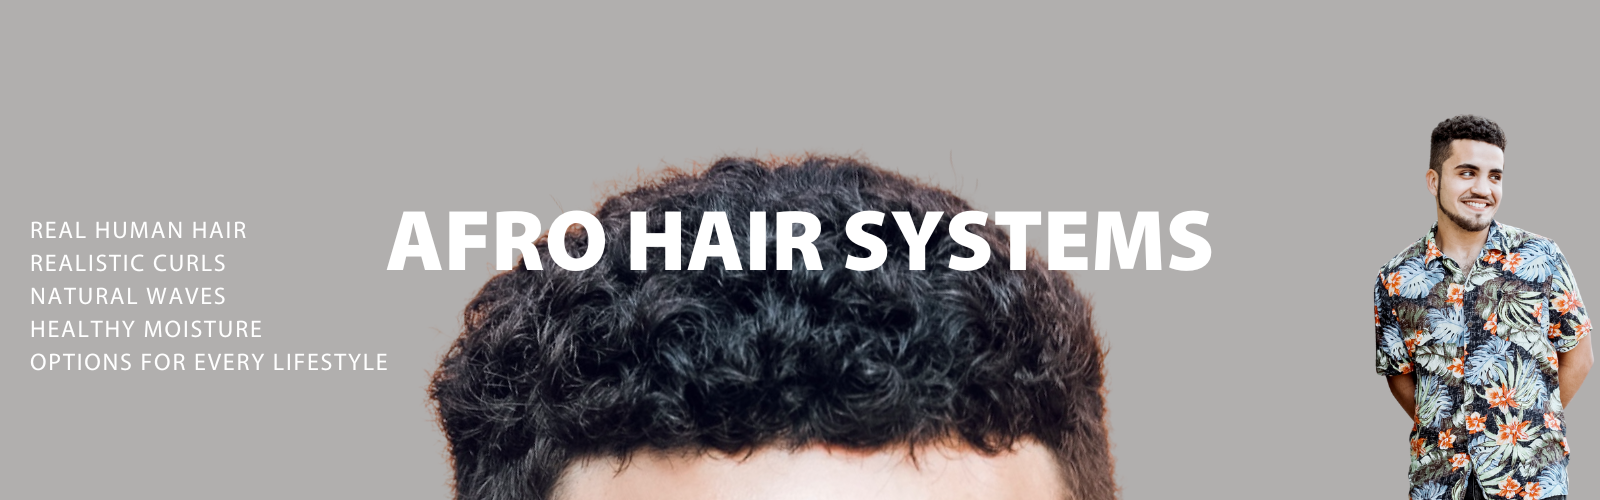 Mens Toupees | Toupees for Men | Hair Systems for Salons | Hair System for Men | Hair Loss for Men | Hair Replacement | Toupees | Hair Systems for Hair Direct | Hair Pieces | Women Toppers | Wholesale Hair Systems Supplier | Wholesale Male Pieces | 